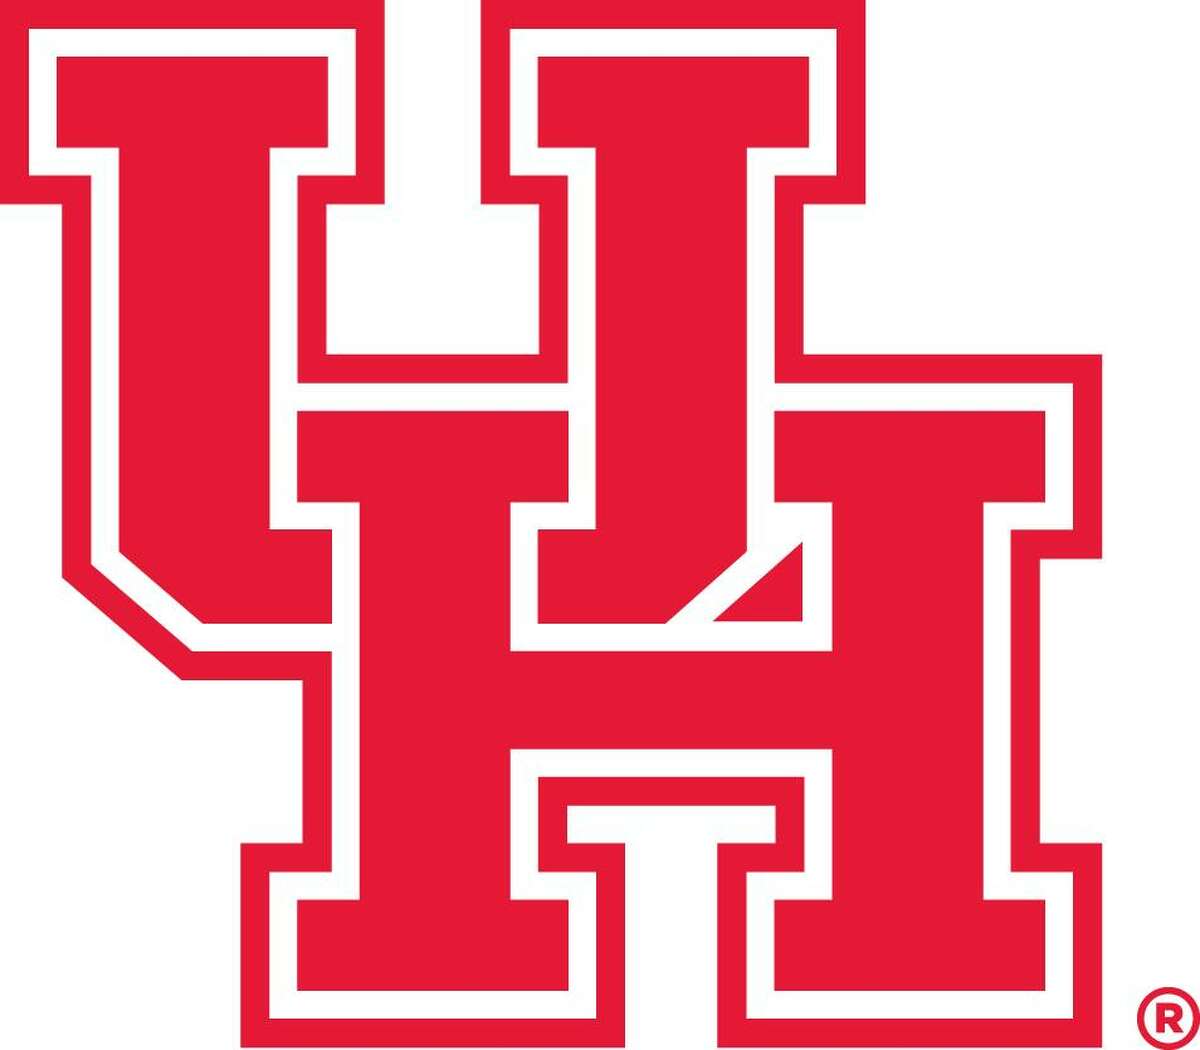 The University of Houston System has four colleges: University of Houston, UH-Downtown, UH-Victoria and UH-Clear Lake.